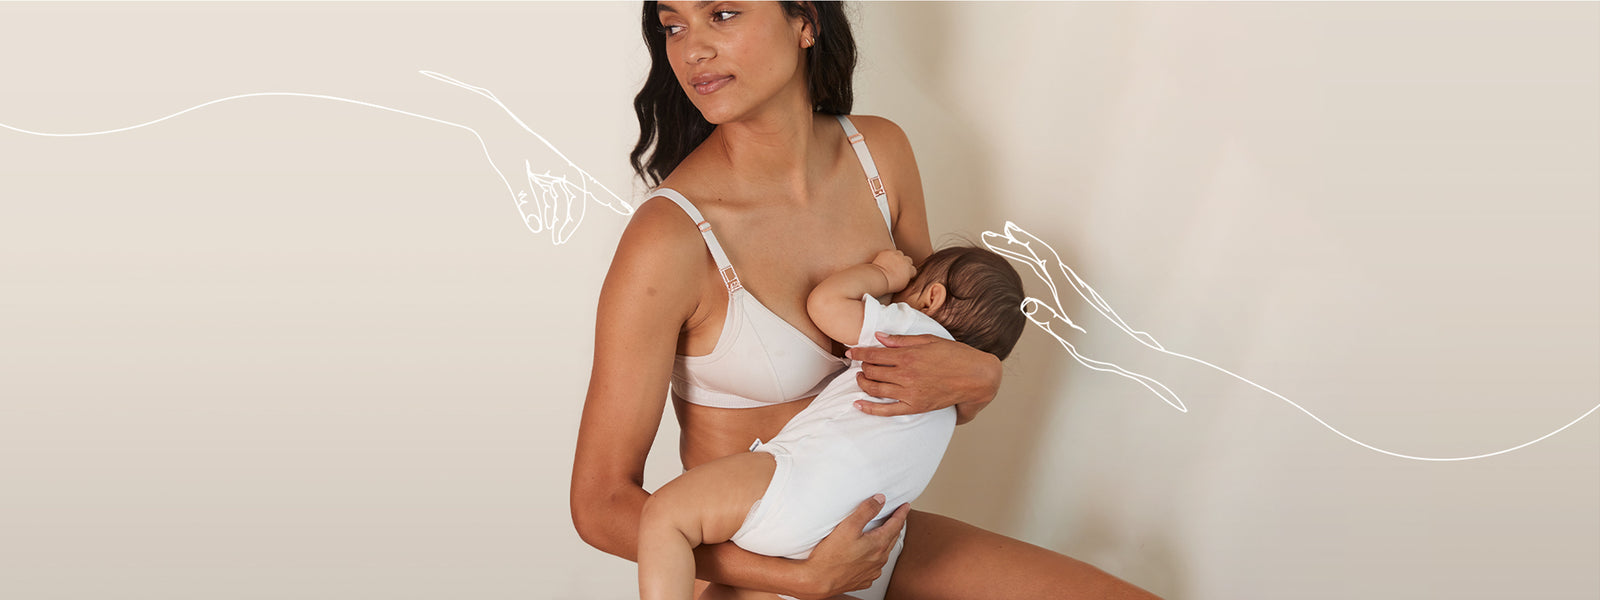 A boob job in a bra?! Yes, you heard right - we designed the